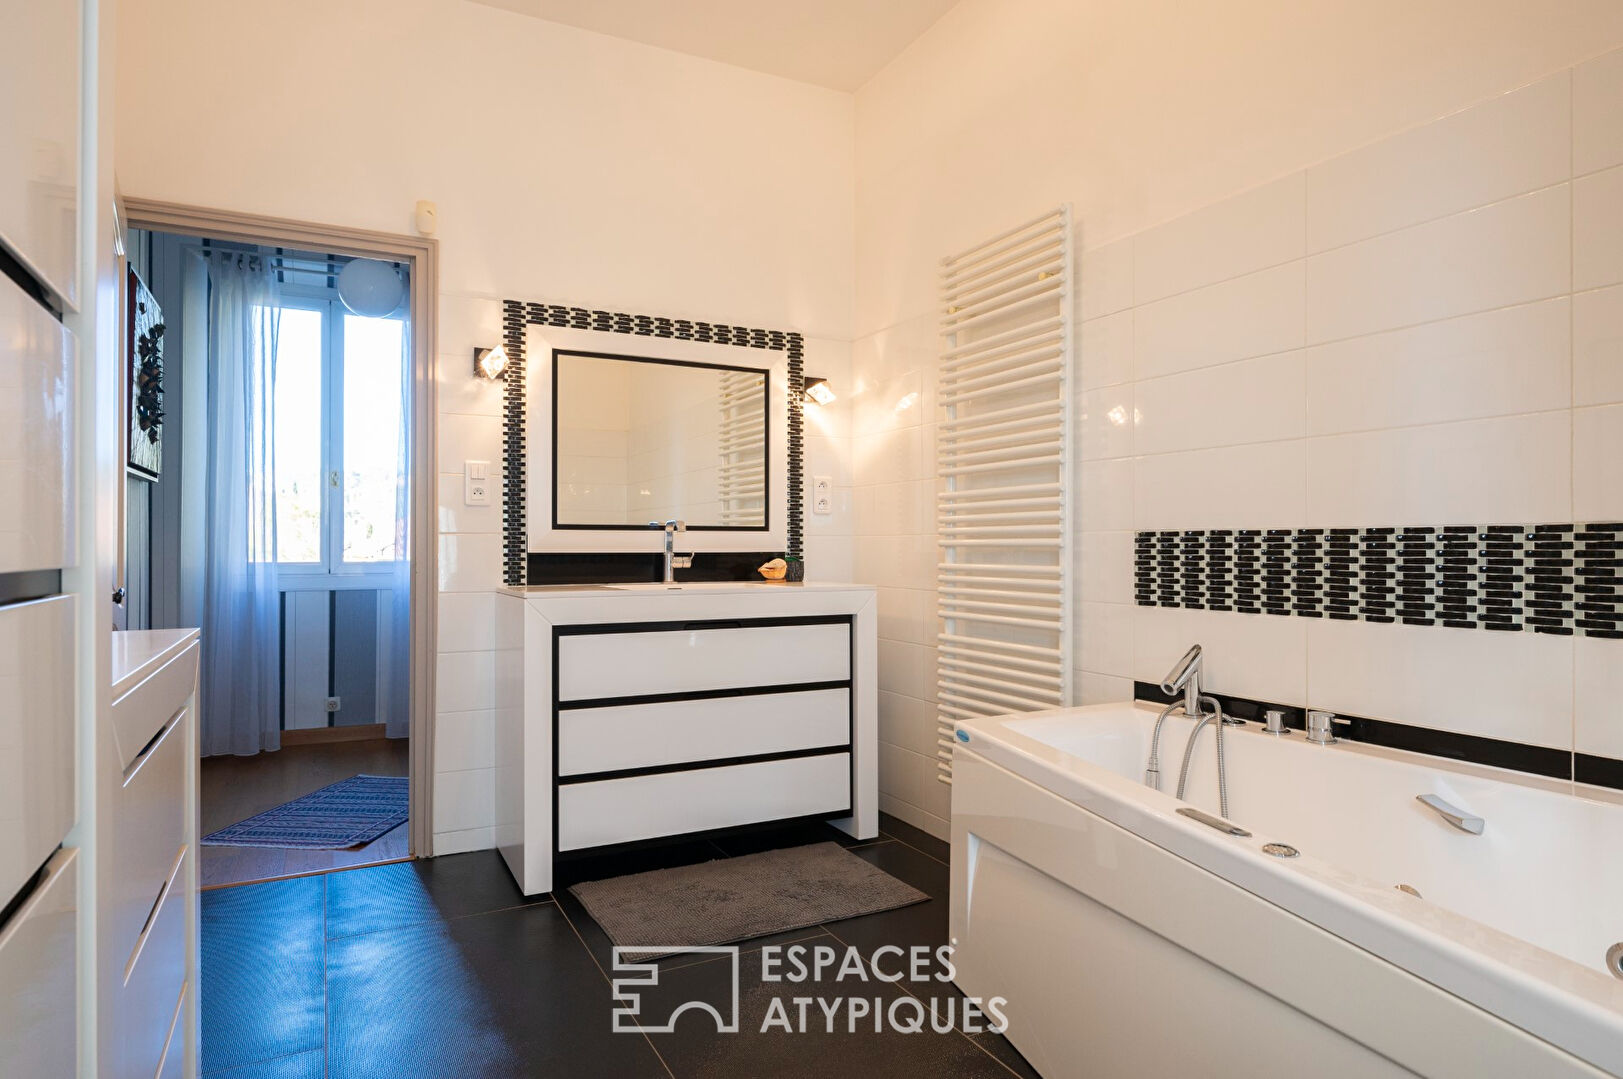 Unusual living environment for this apartment in the city center of Hyères